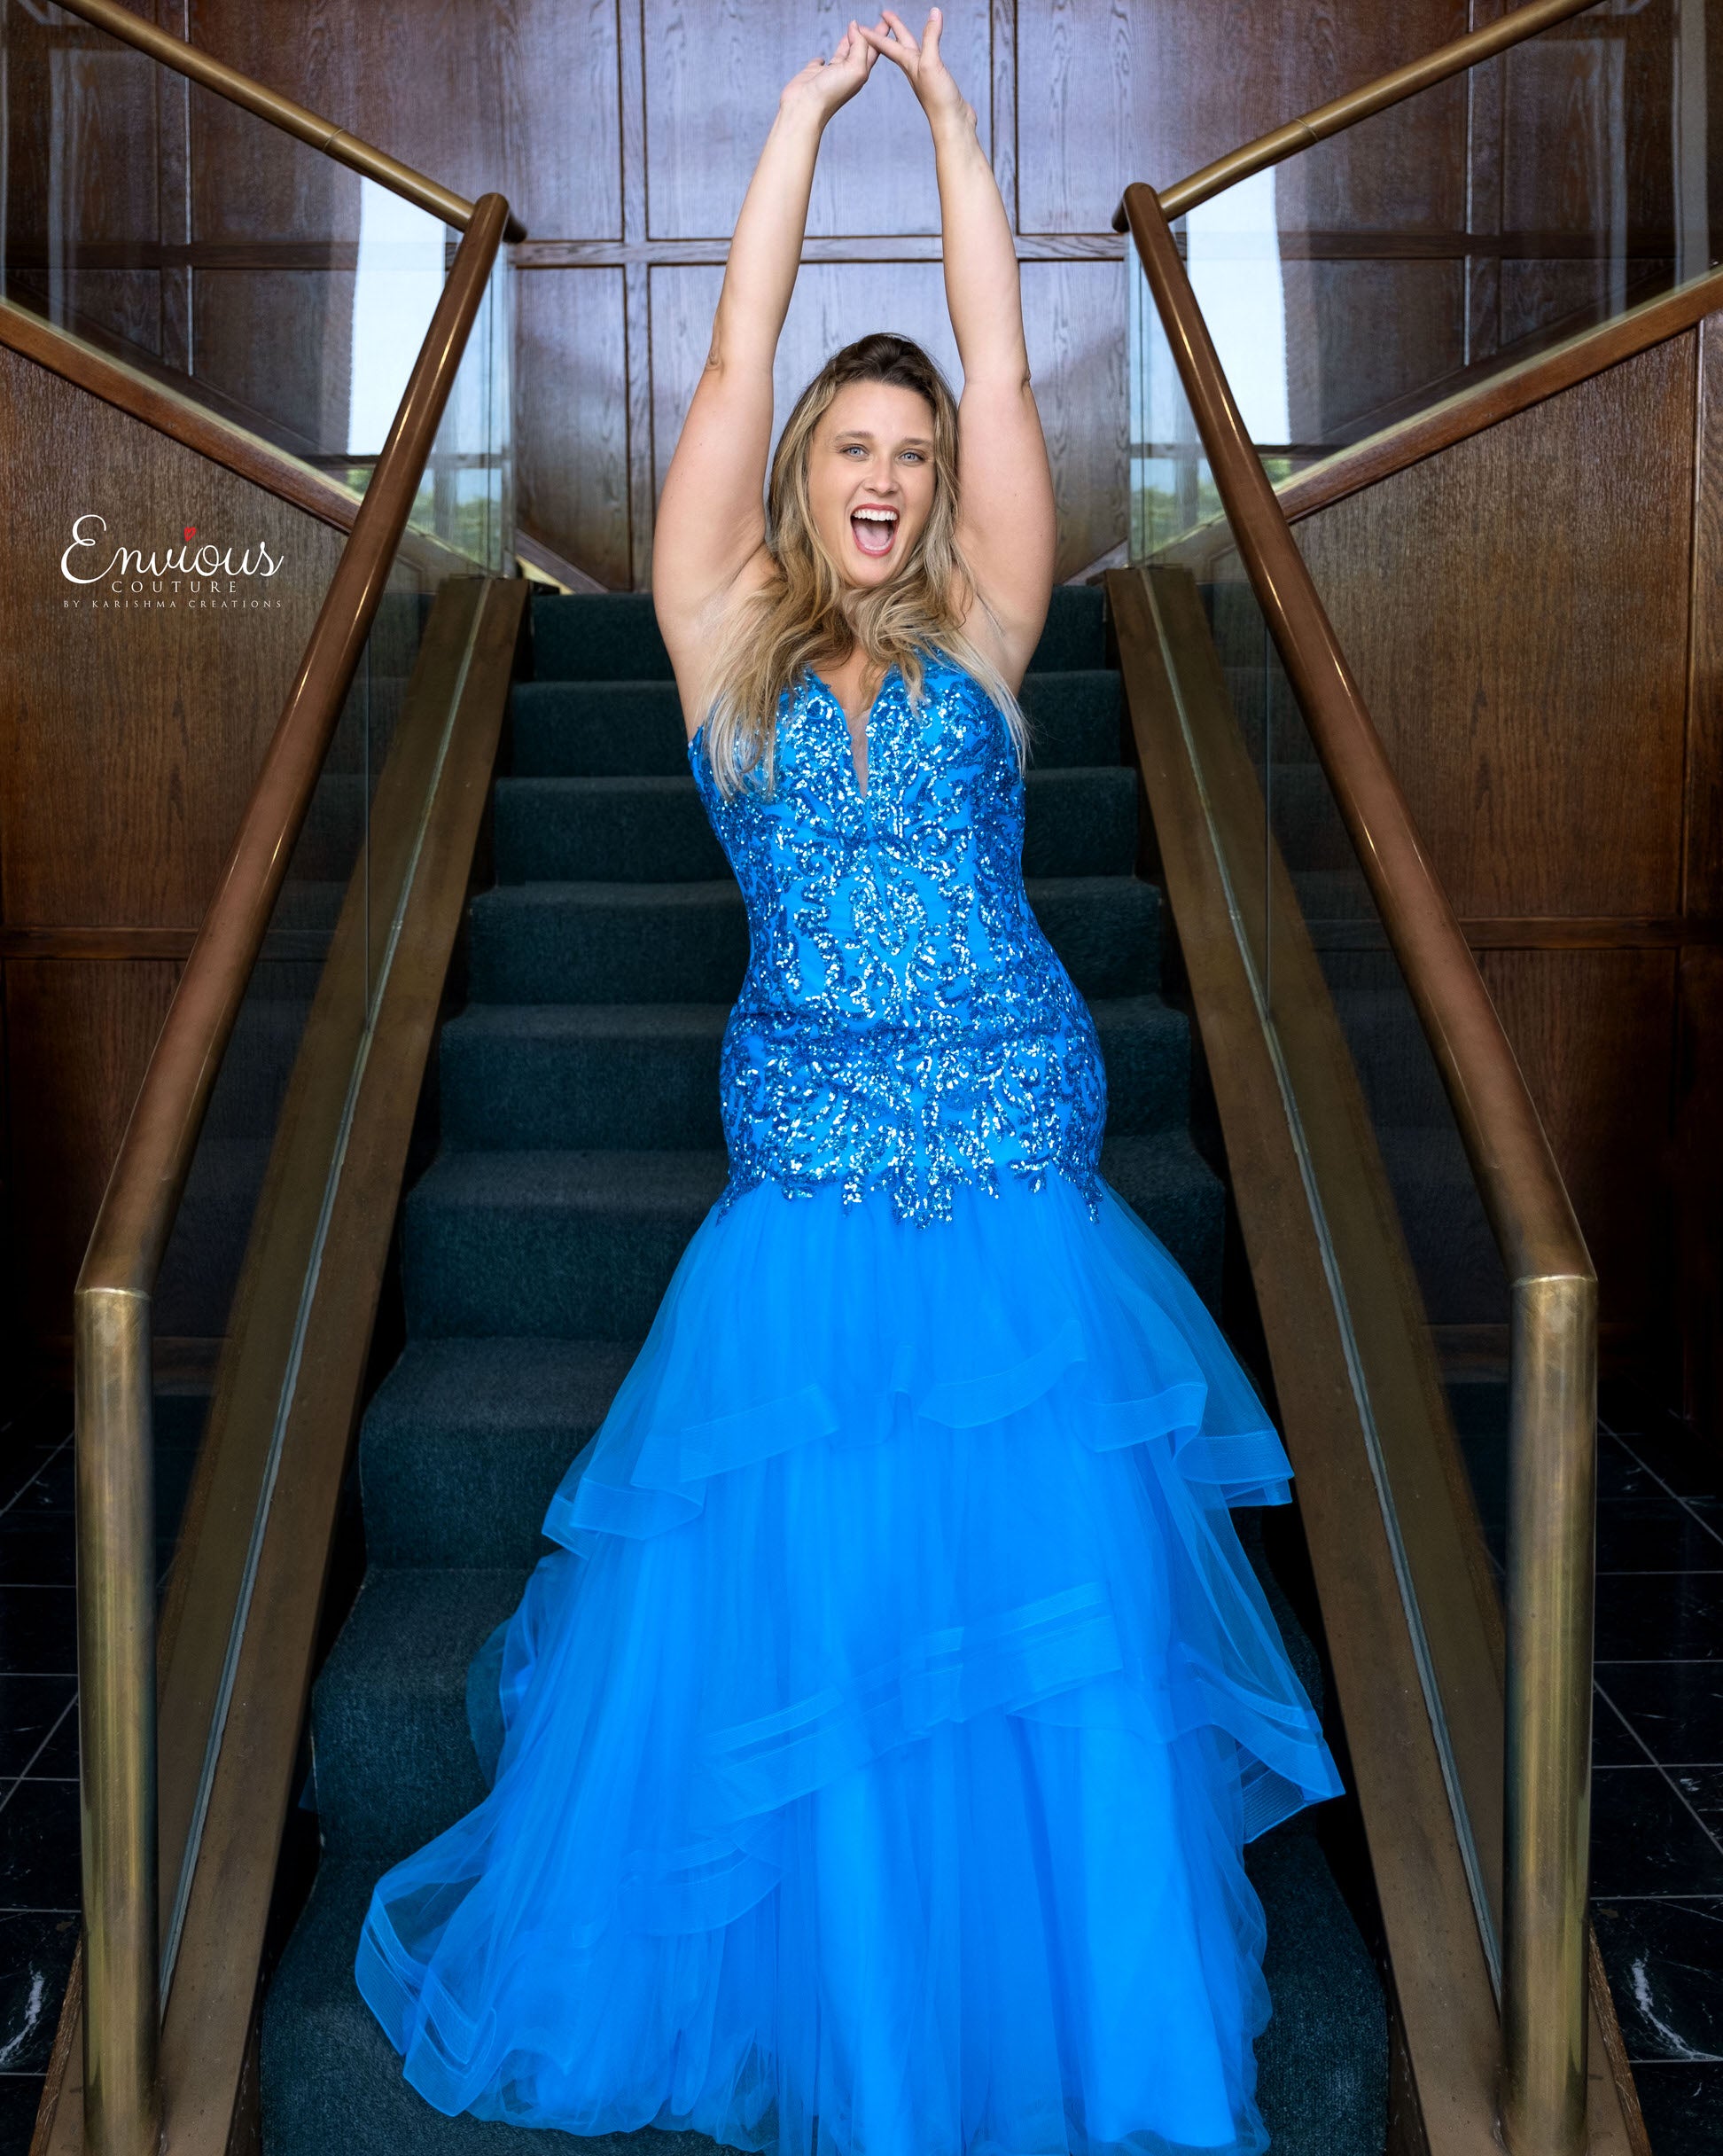 Envious-Couture-E1516-Turquoise-Prom-Dress-Front-Emebllished-V-Neckline-Sequin-Fit-and-Flare-Layered-Mermaid-Skirt-Backless